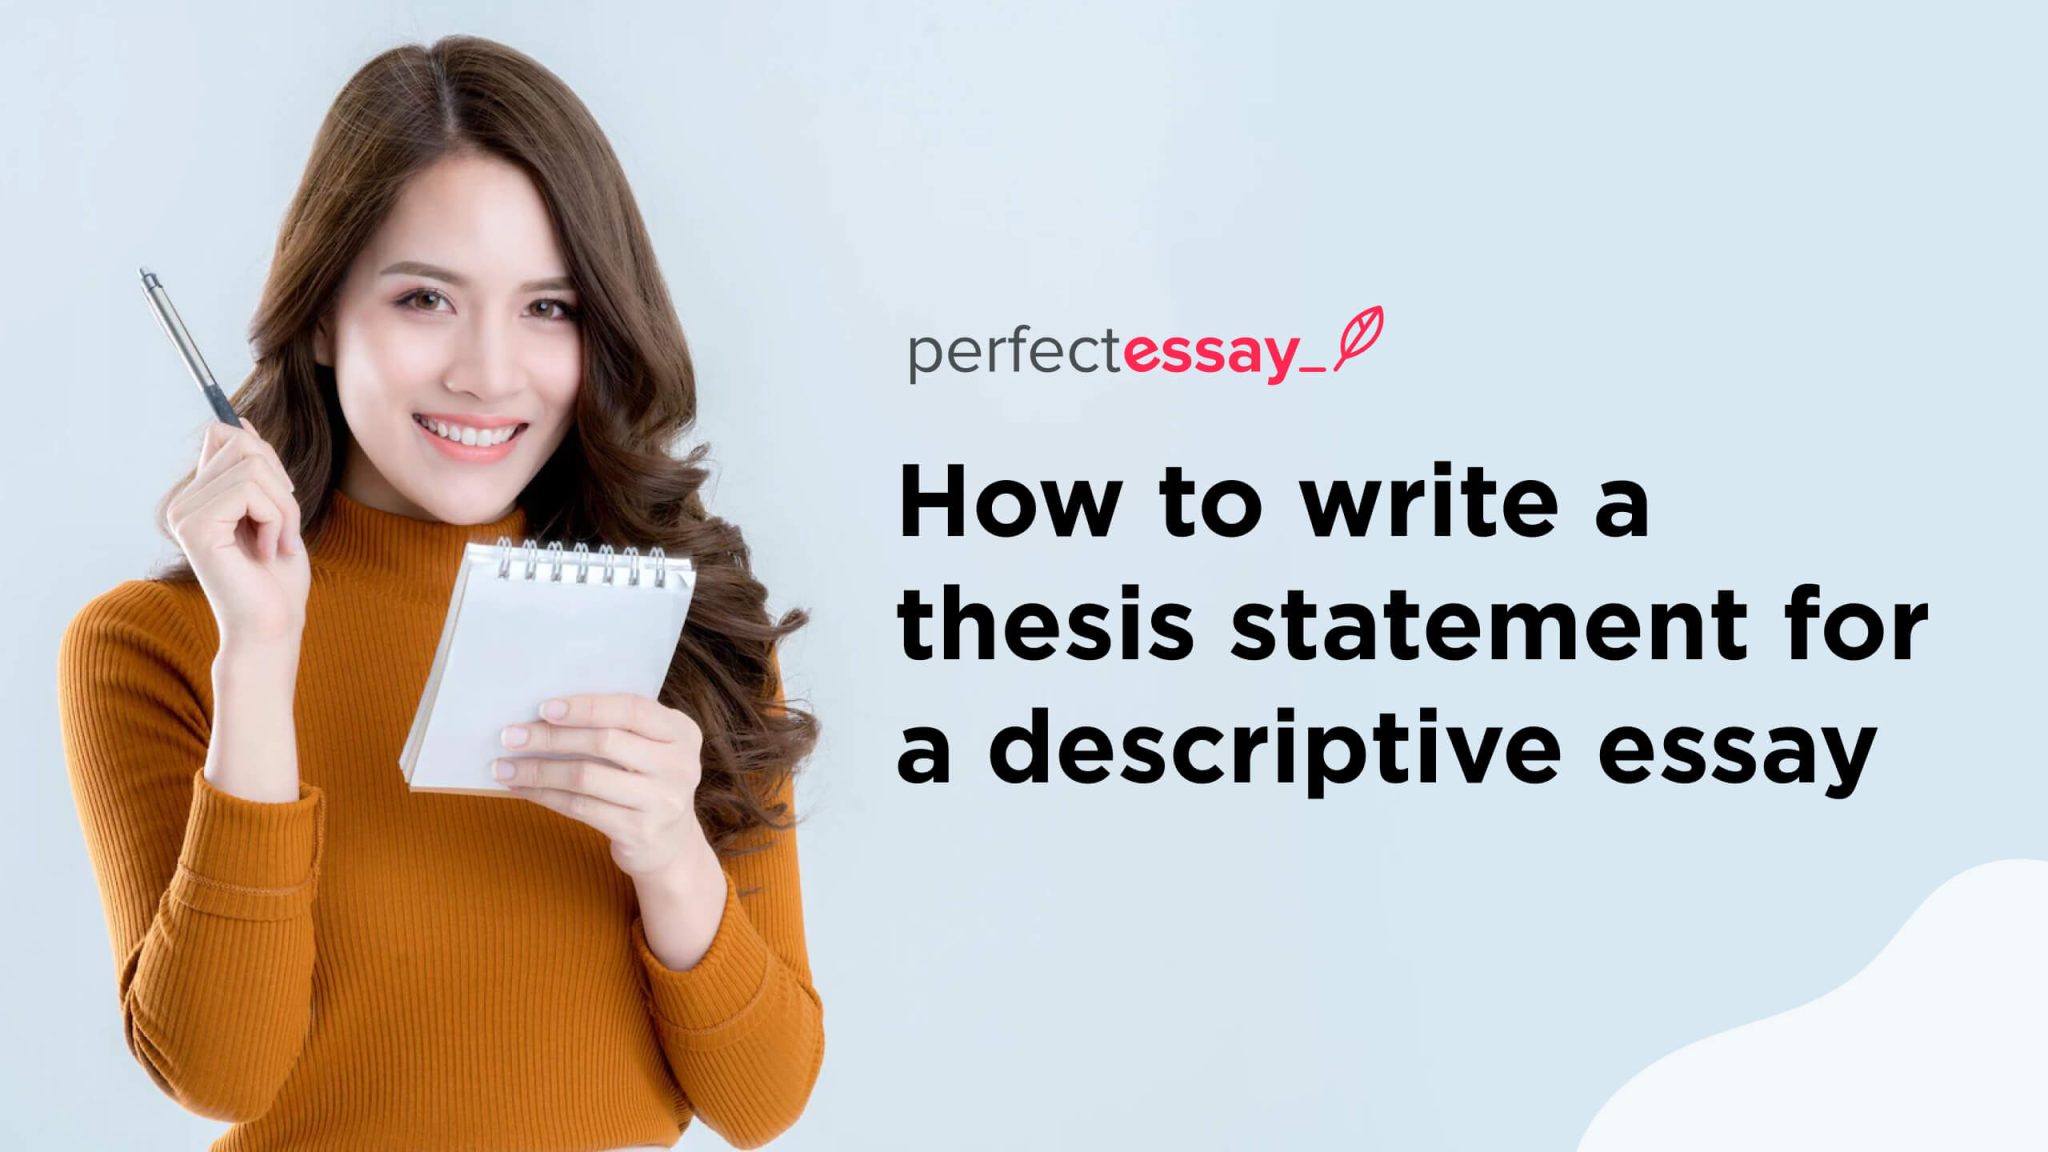 How To Write A Thesis Statement For A Descriptive Essay